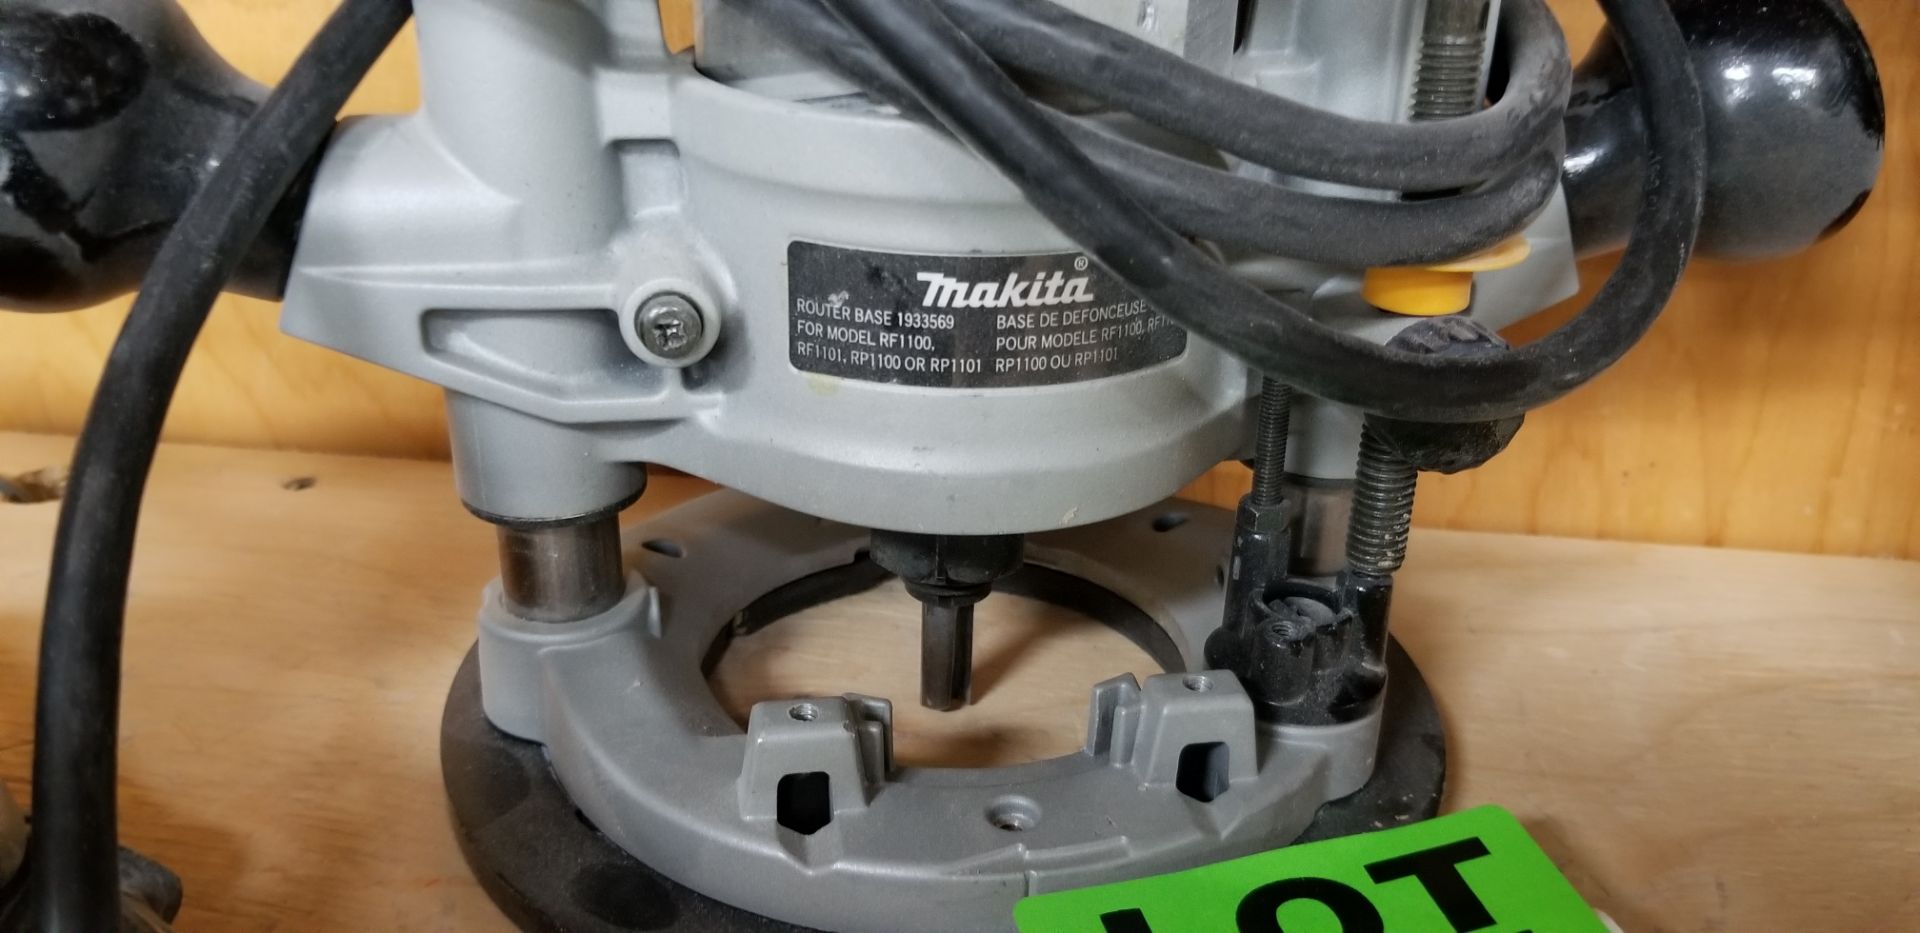 MAKITA Router mod. RF1101 with base. 120V, 50-60HZ, 8000-2400min RPM//Routeur MAKITA mod. RF1101 - Image 3 of 3